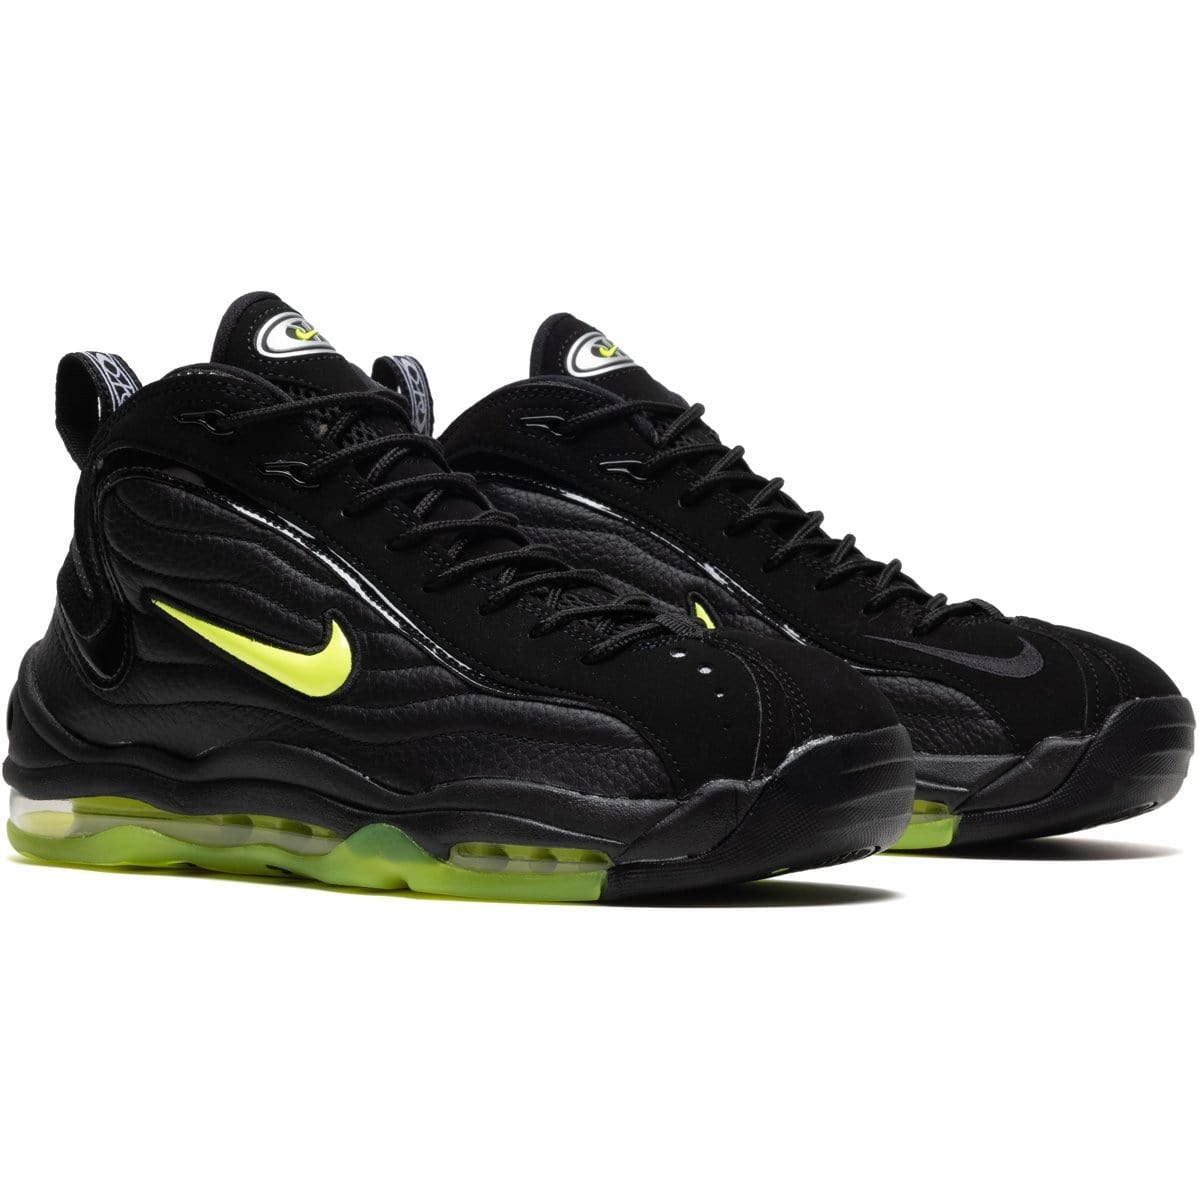 Nike Air Total Max Uptempo Sugarhill by Revive Customs 